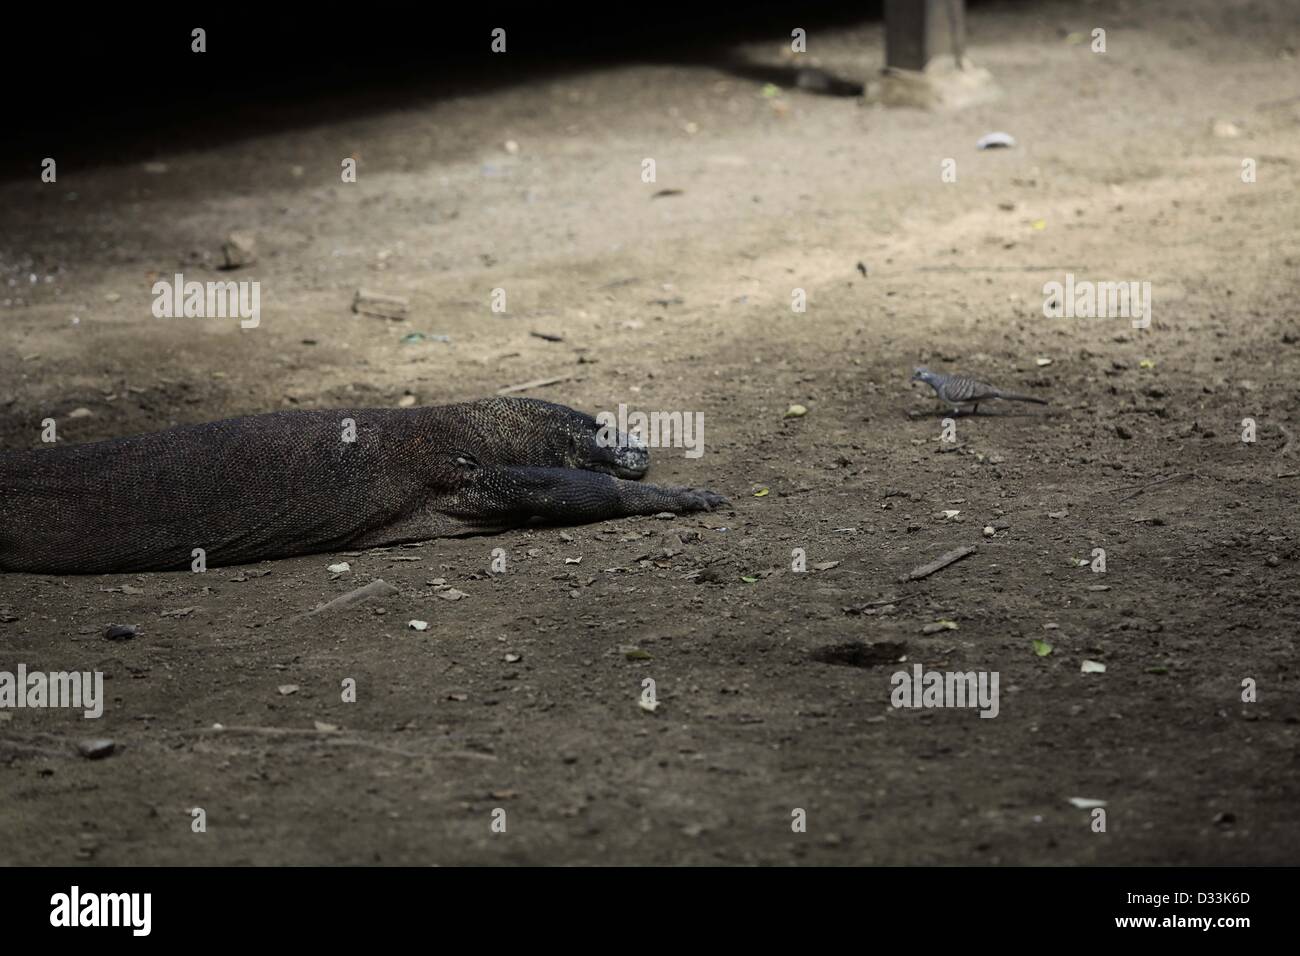 Feb. 8, 2013 - Flores, Indonesia - February 08, 2013 - Rinca Island, Flores, Indonesia ; UNDATED PHOTO - A doves were feeding near the Komodo dragon (Varanus komodoensis) in Rinca Island, Komodo National Park, Flores, Indonesia. Komodo dragons hunt and ambush prey including invertebrates, birds, and mammals. Their group behaviour in hunting is.exceptional in the reptile world. The diet of big Komodo dragons.mainly consists of deer, though they also eat considerable amounts of.carrion. Komodo dragons also occasionally attack humans in the area of.West Manggarai Regency where they live in Indone Stock Photo